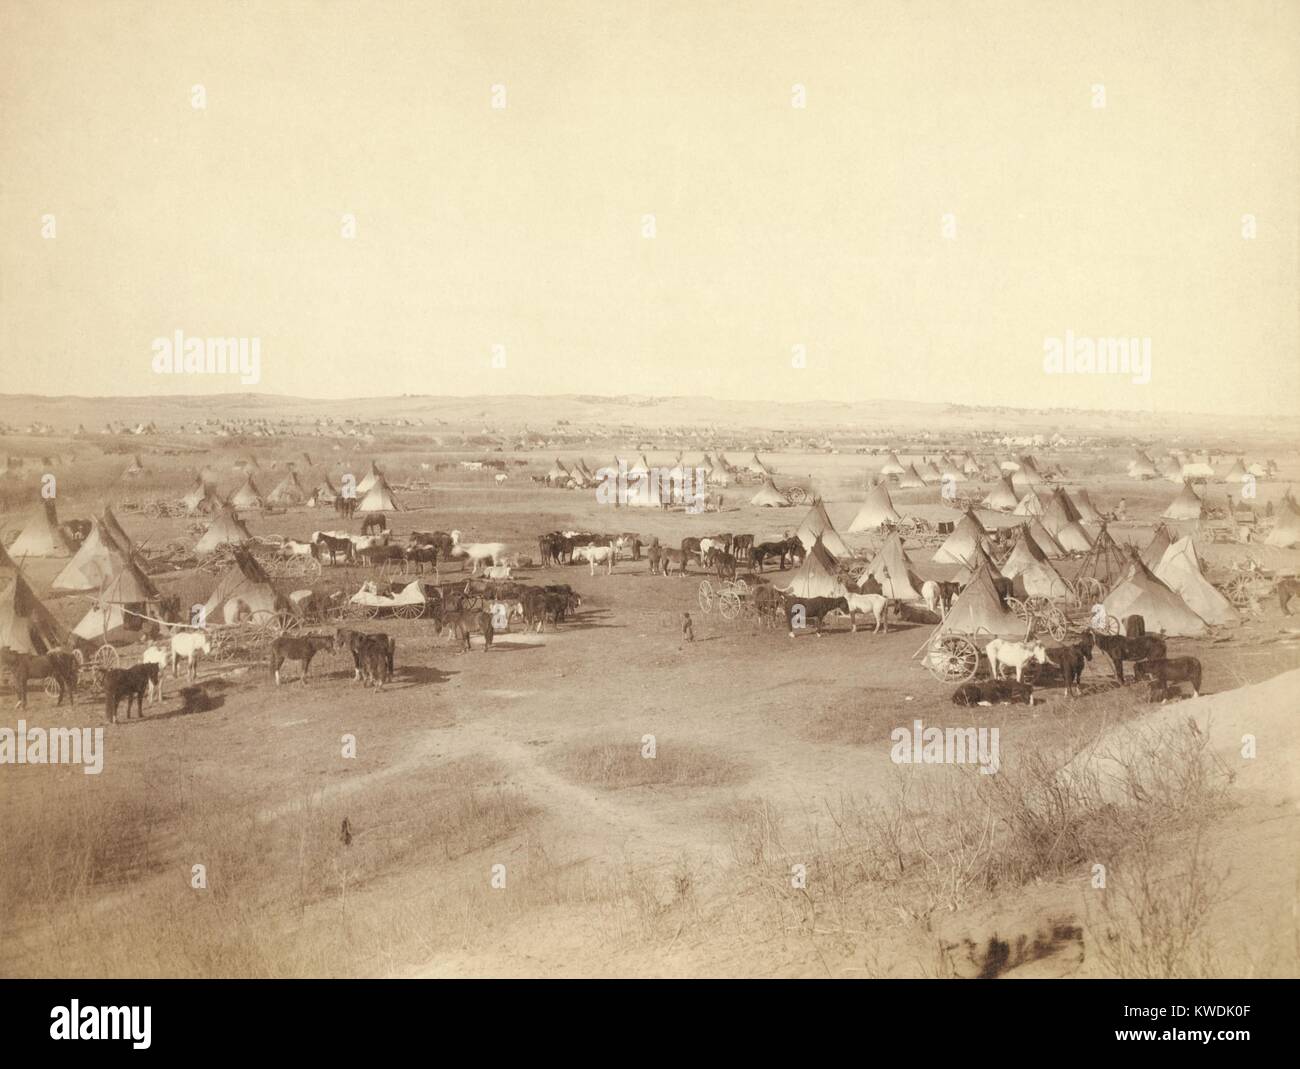 Hostile Indian camp of tipis, horses, and wagons on Pine Ridge Indian Reservation in Jan. 1891. They were considered hostiles because they joined the Ghost Dance Movement, resisted white indoctrination and culture. They only reluctantly followed orders to come into the Pine Ridge Agency, in late 1890, before the Wounded Knee Massacre. Photo by John Grabill, Jan. 1891 (BSLOC 2017 18 13) Stock Photo